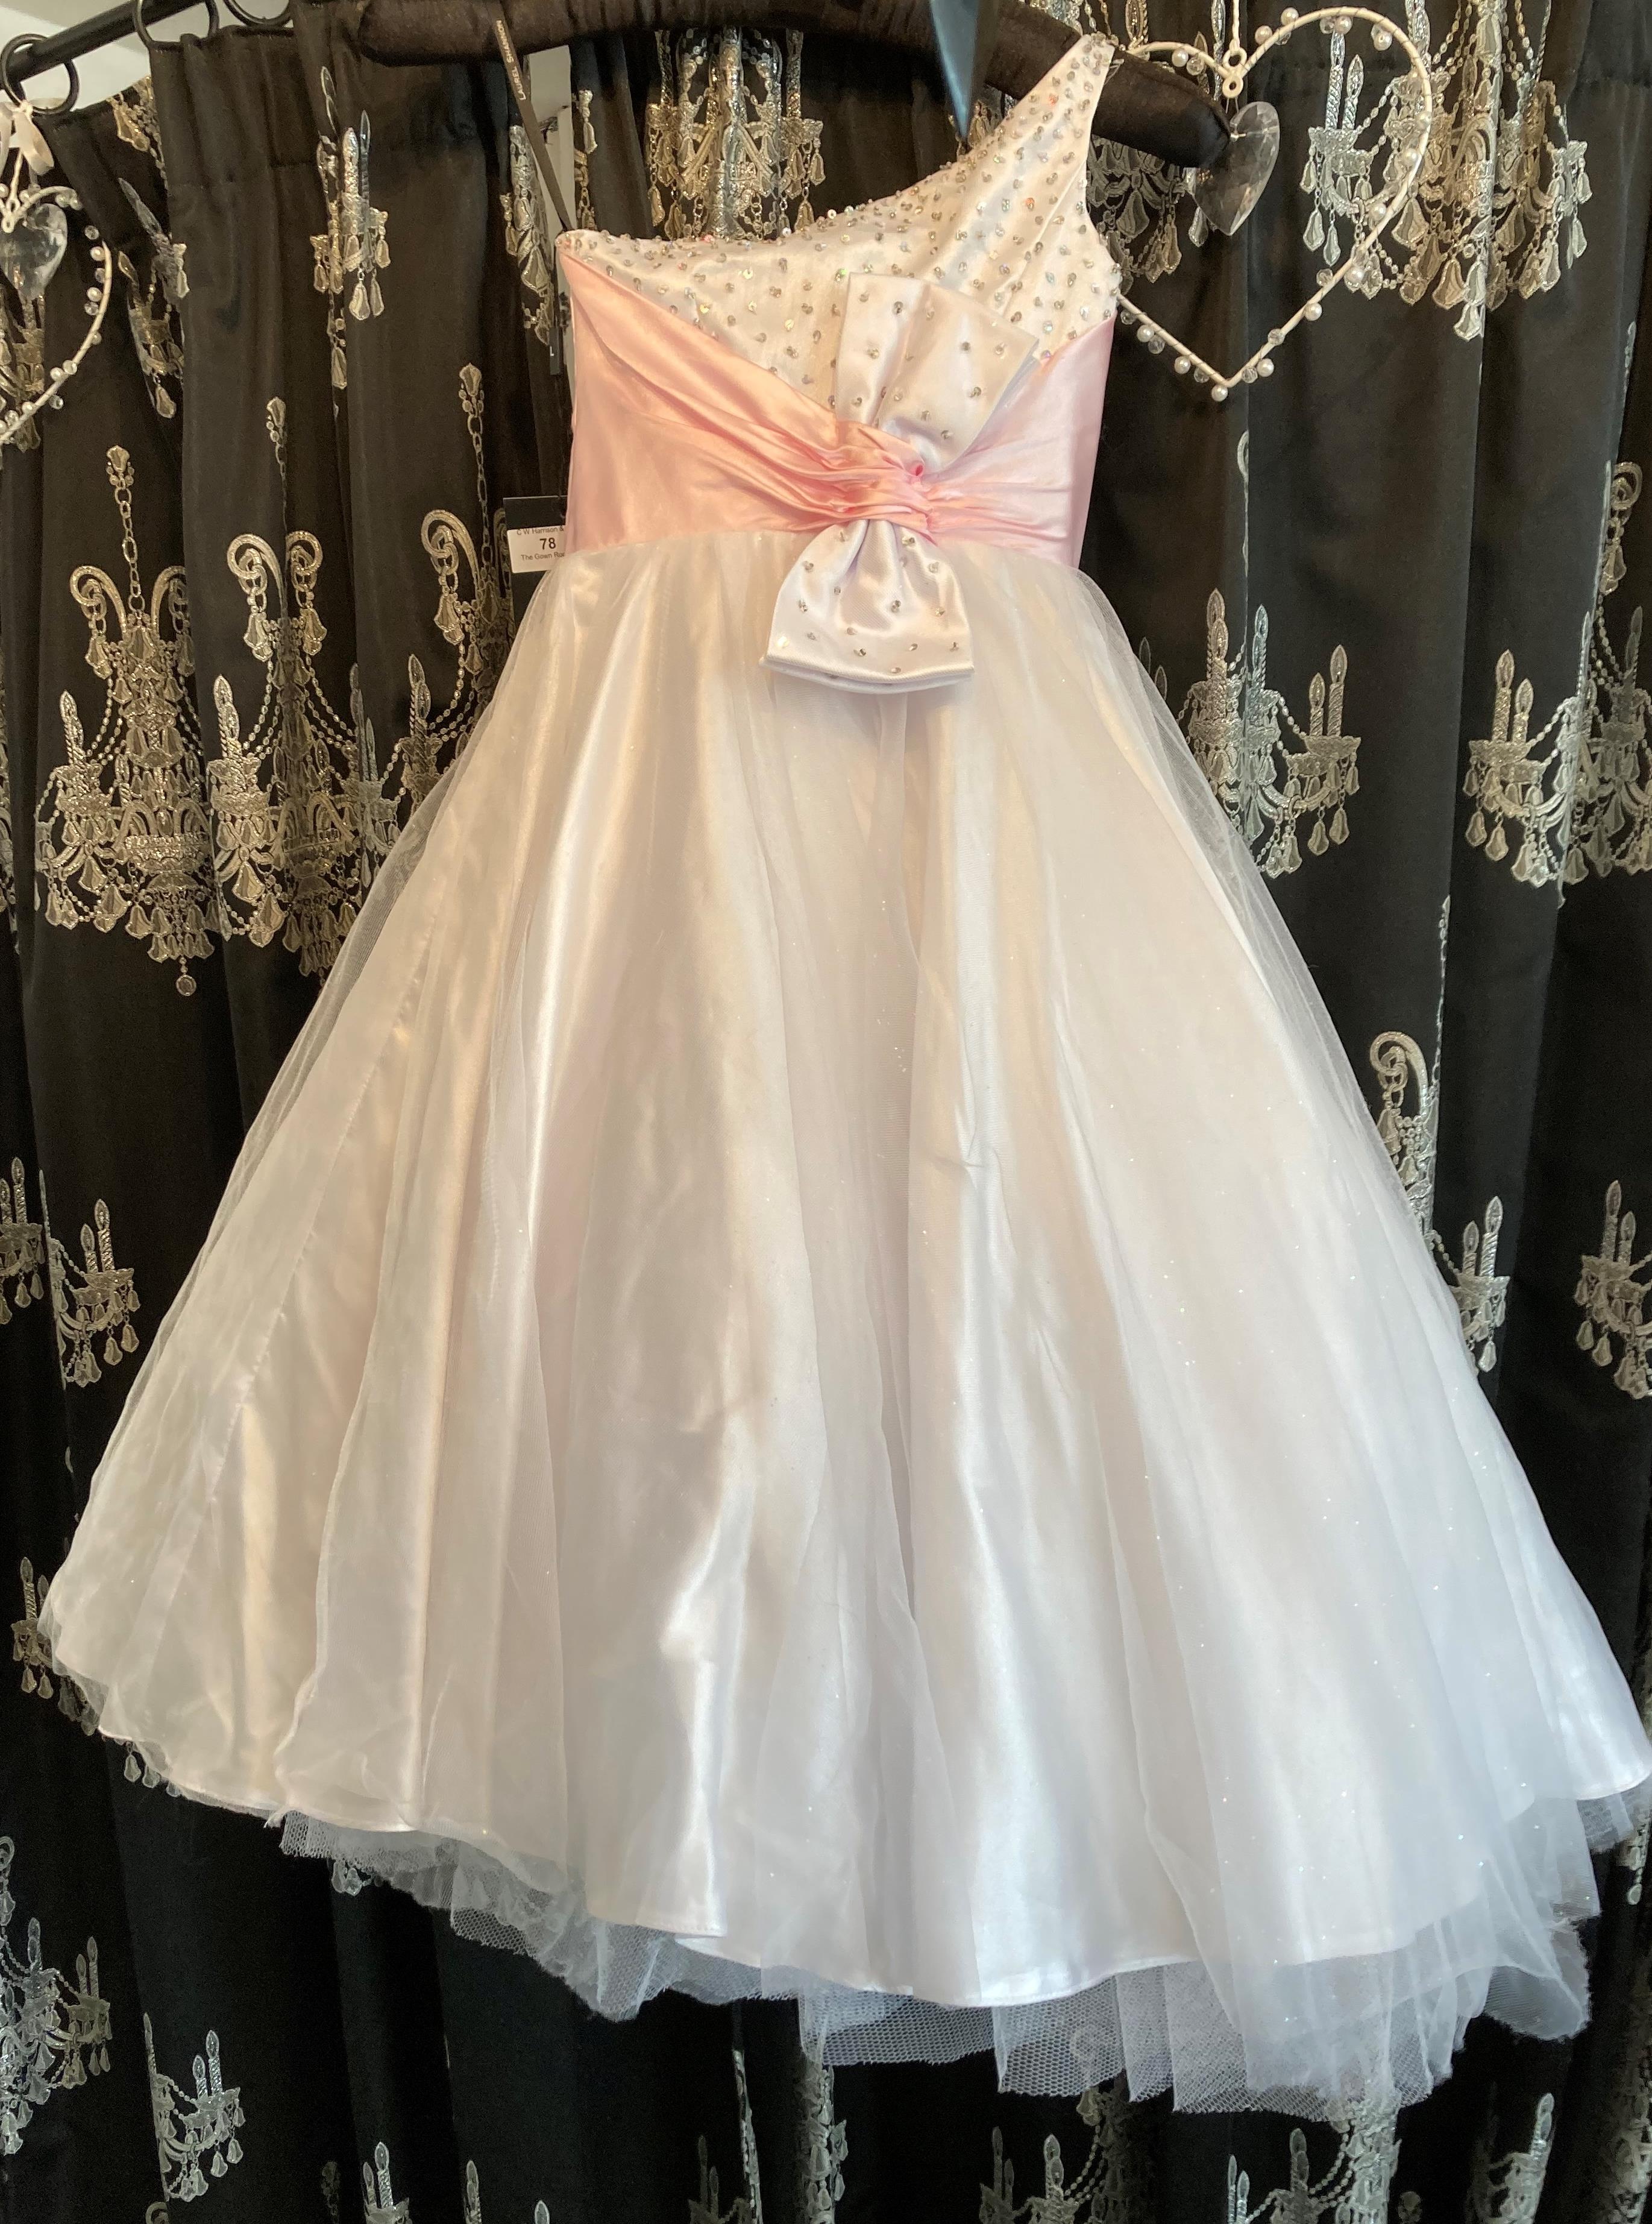 Children's white/pink pageant gown, age 4-6.